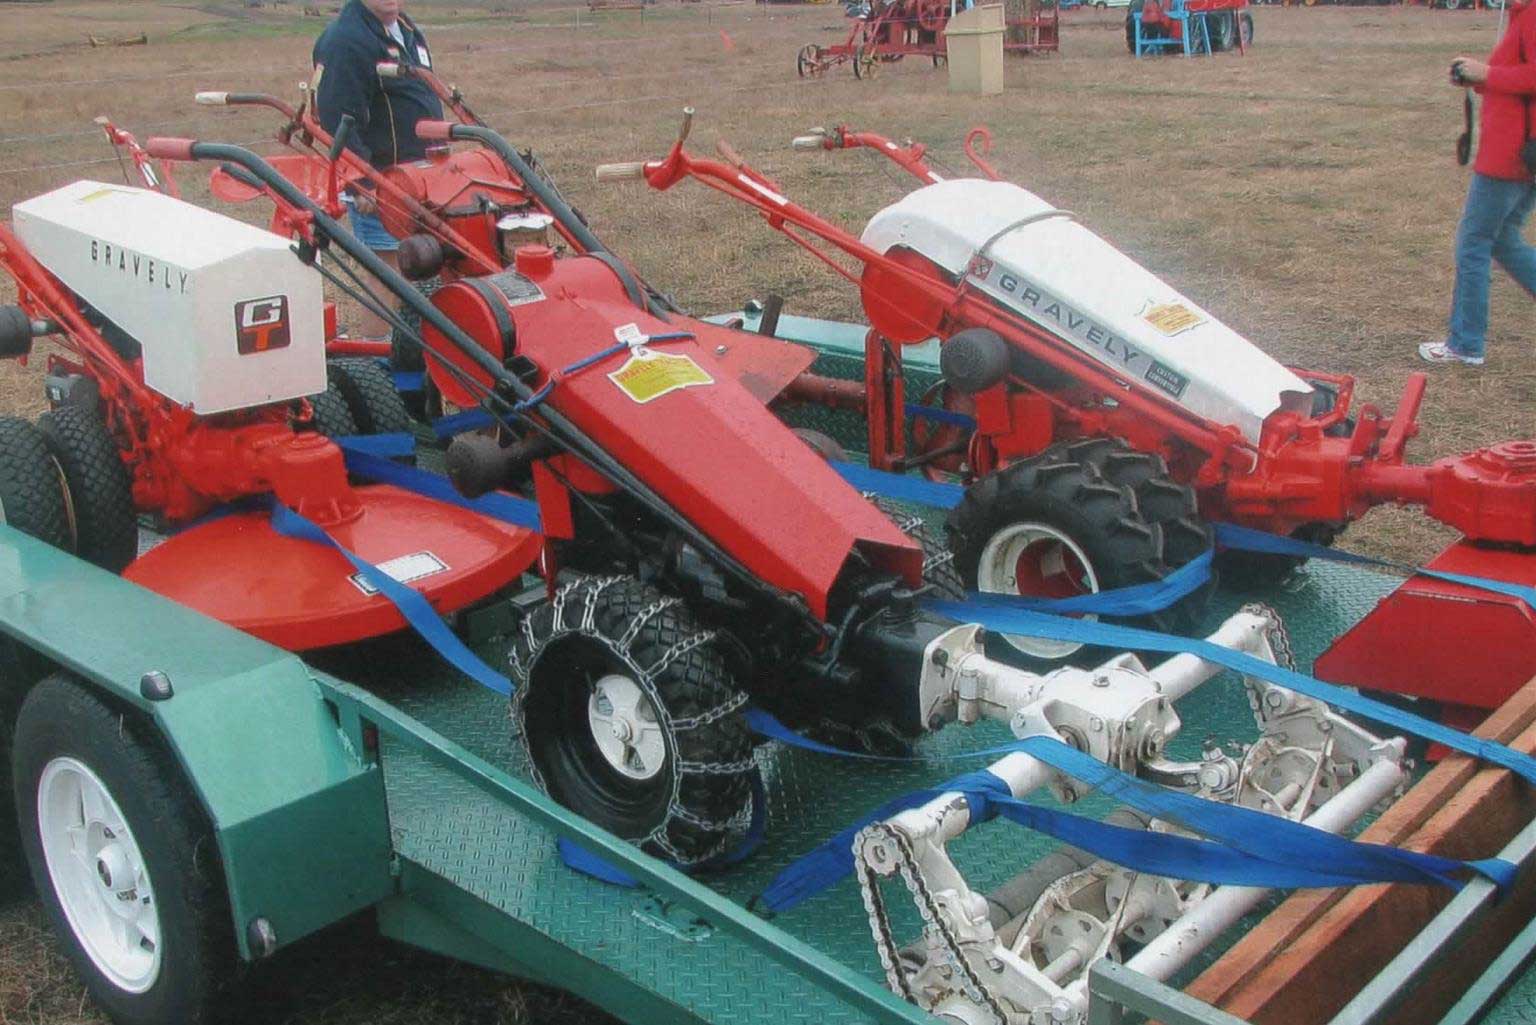 A slightly different sort of Studebaker: eight restored models of Gravely Tractors ranging from 1961 to 1968, along with a new 2011model.